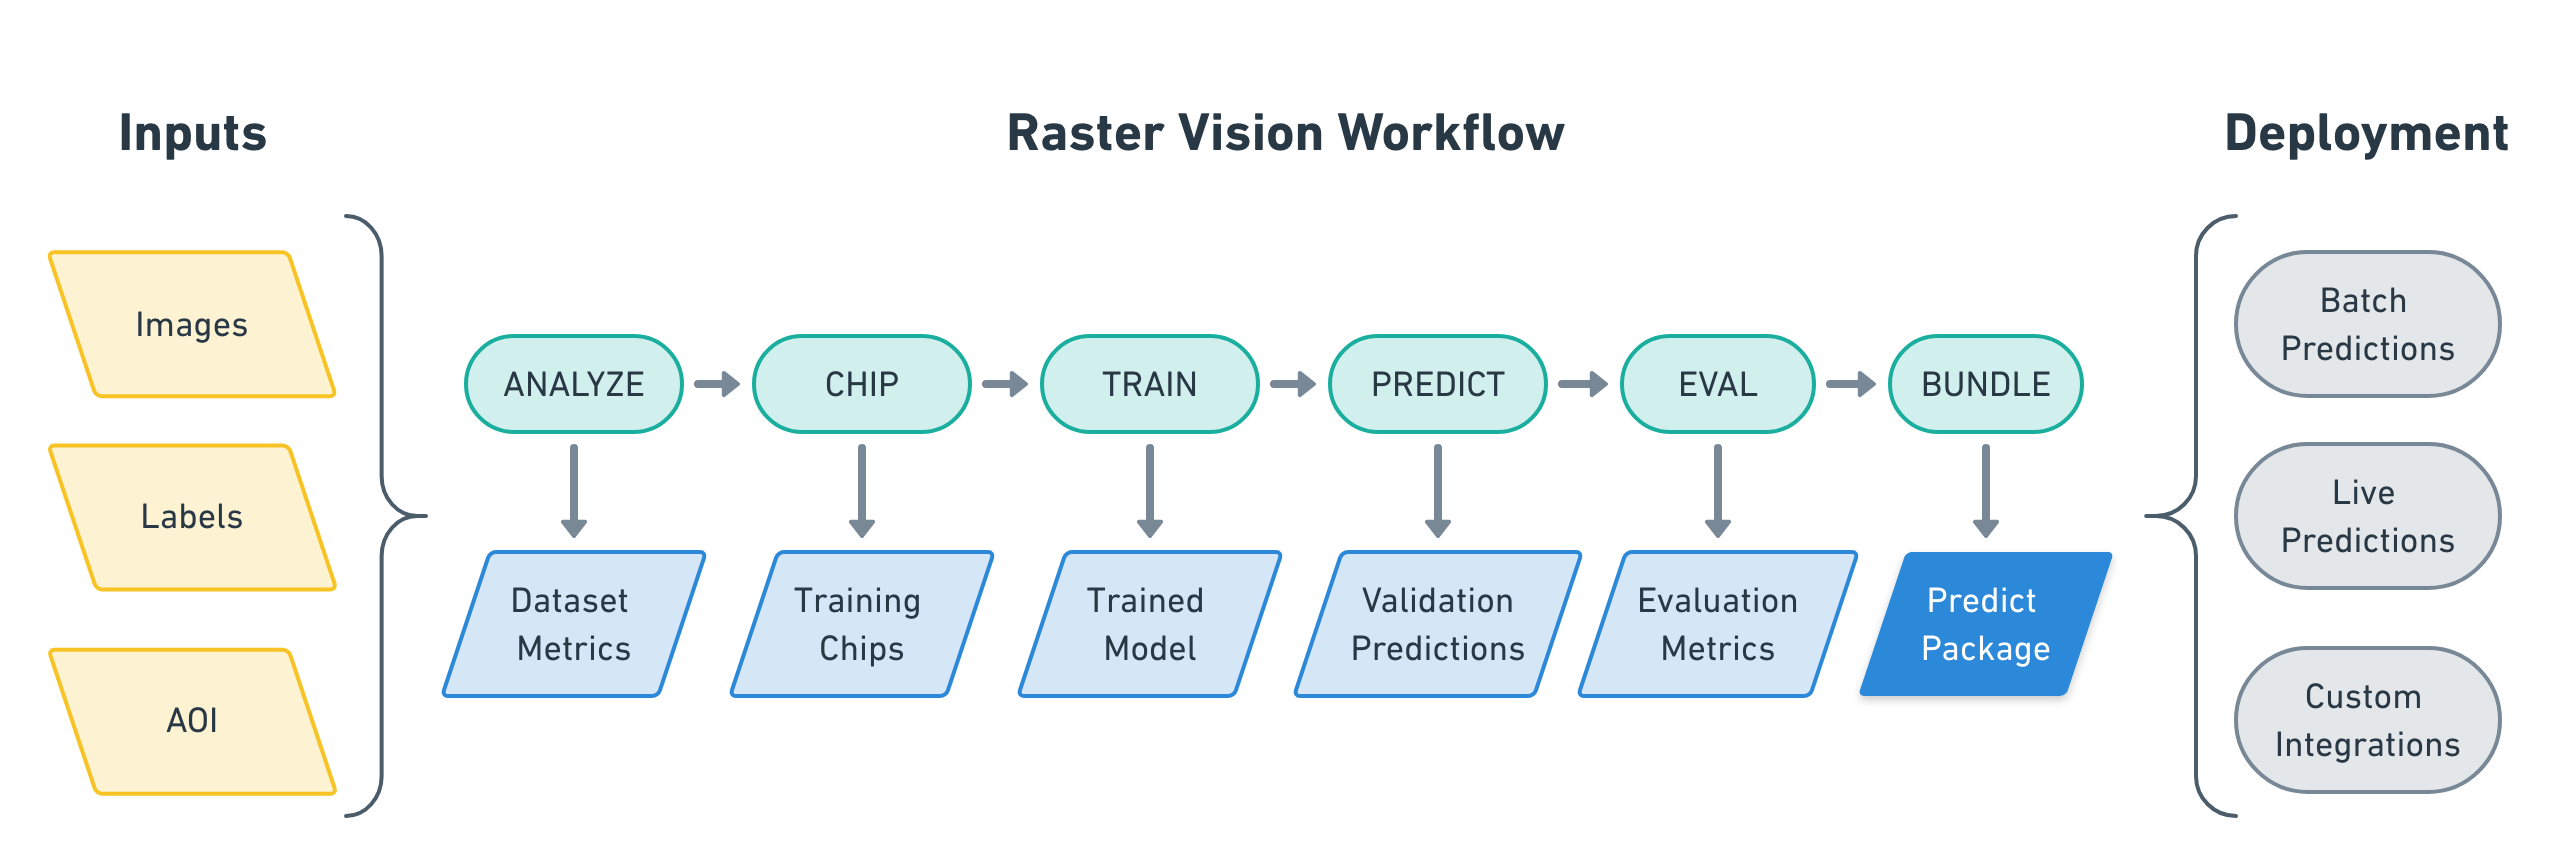 Chart of the Raster Vision workflow, detailing types of inputs, the deep learning process, and deployment